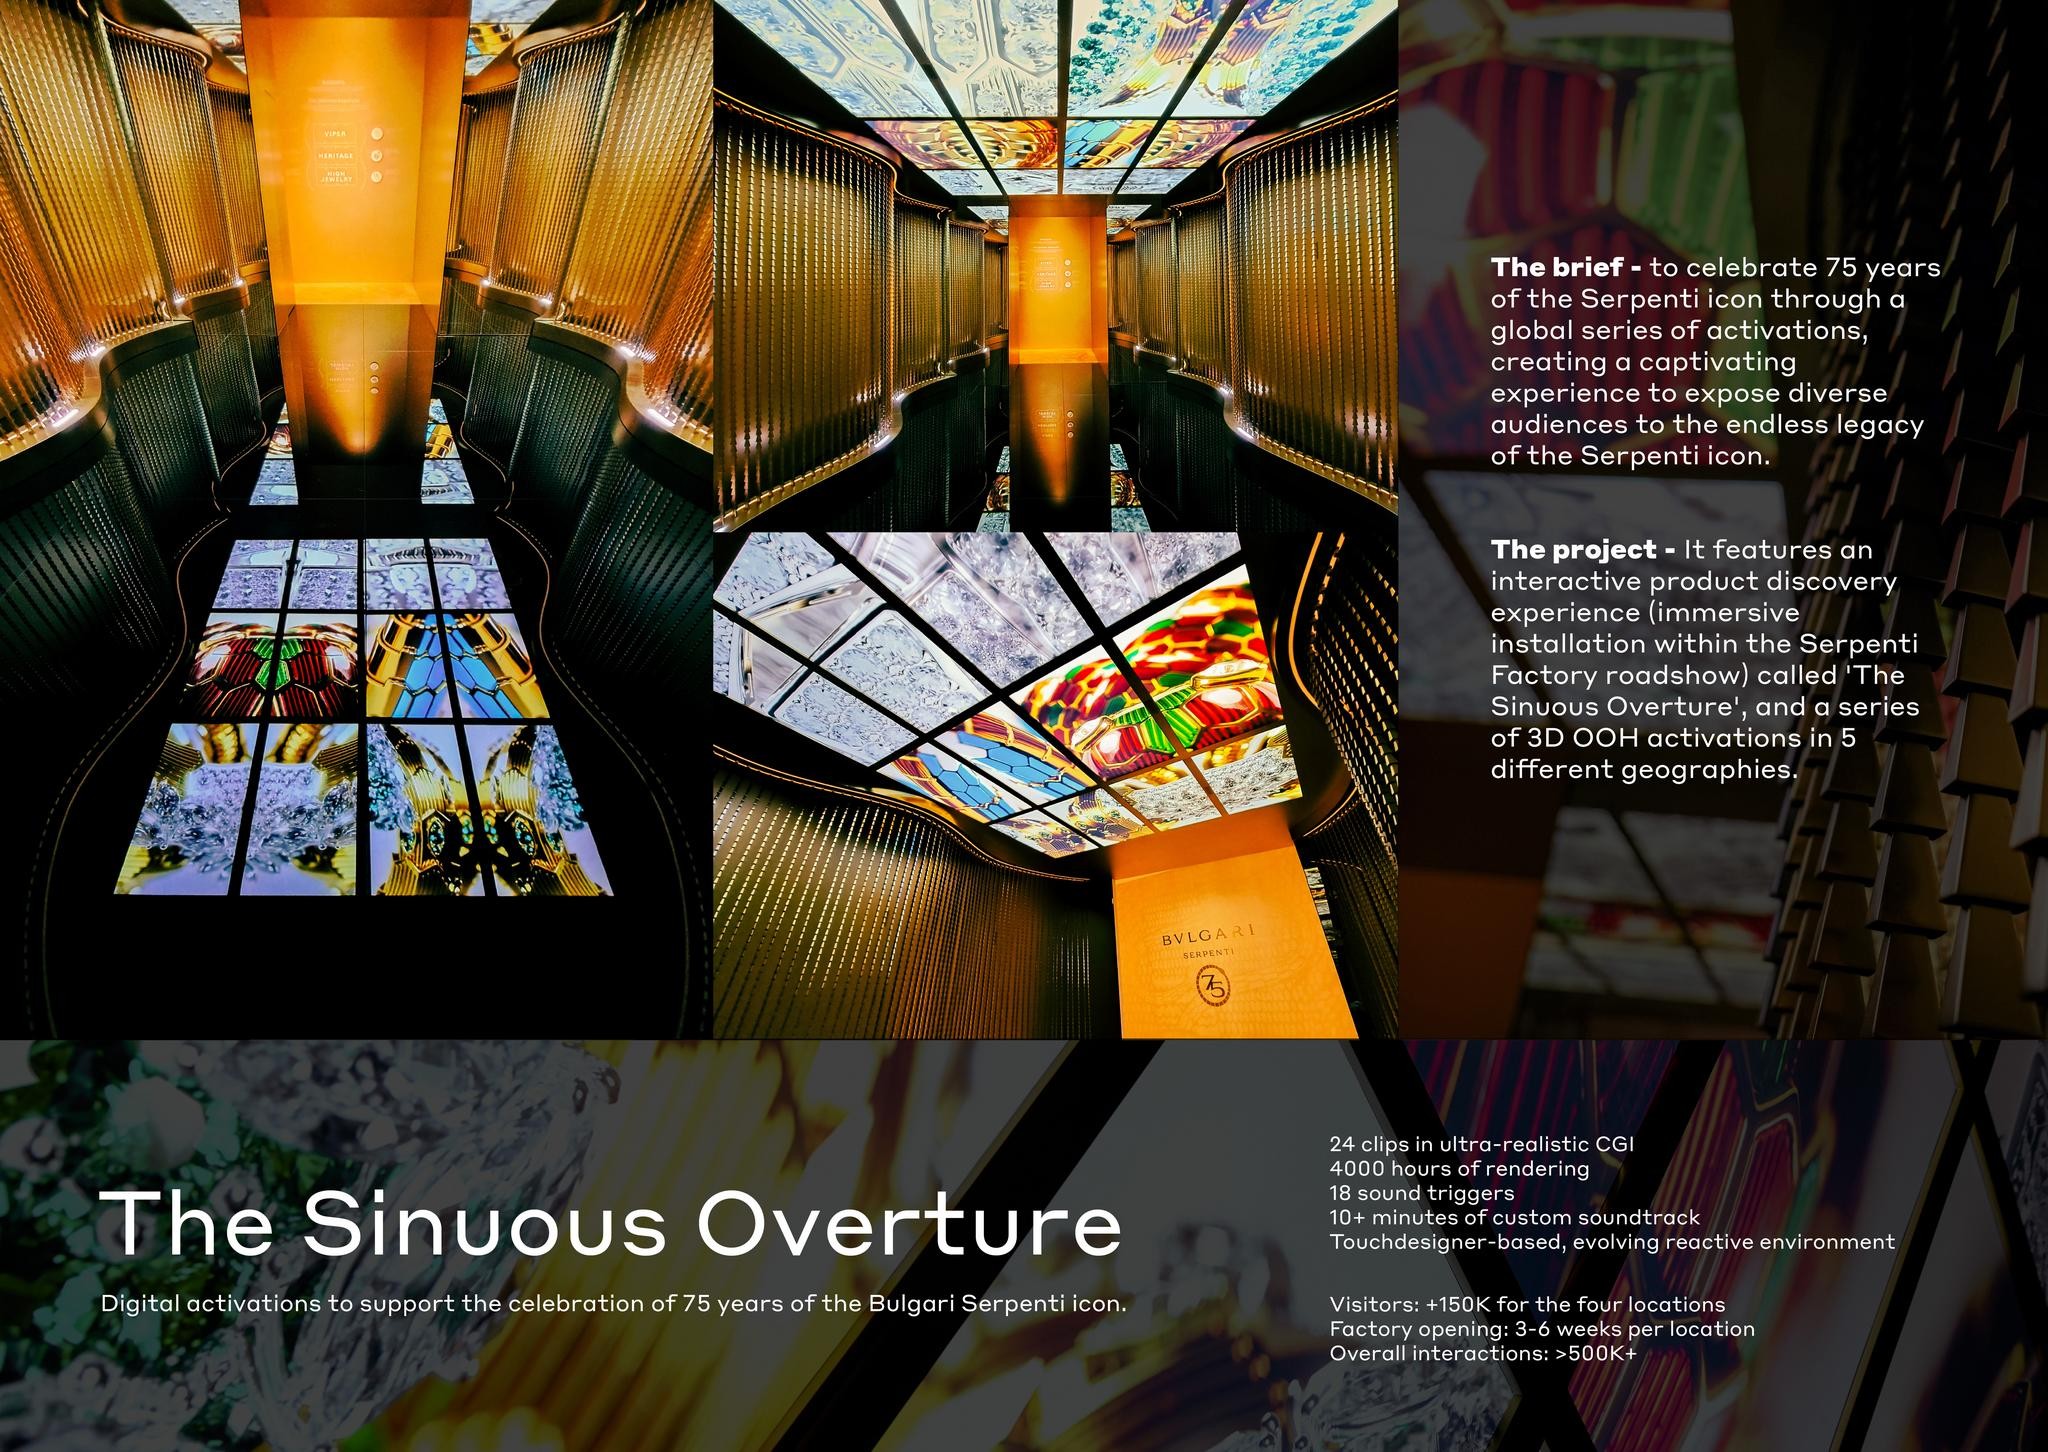 The Sinuous Overture